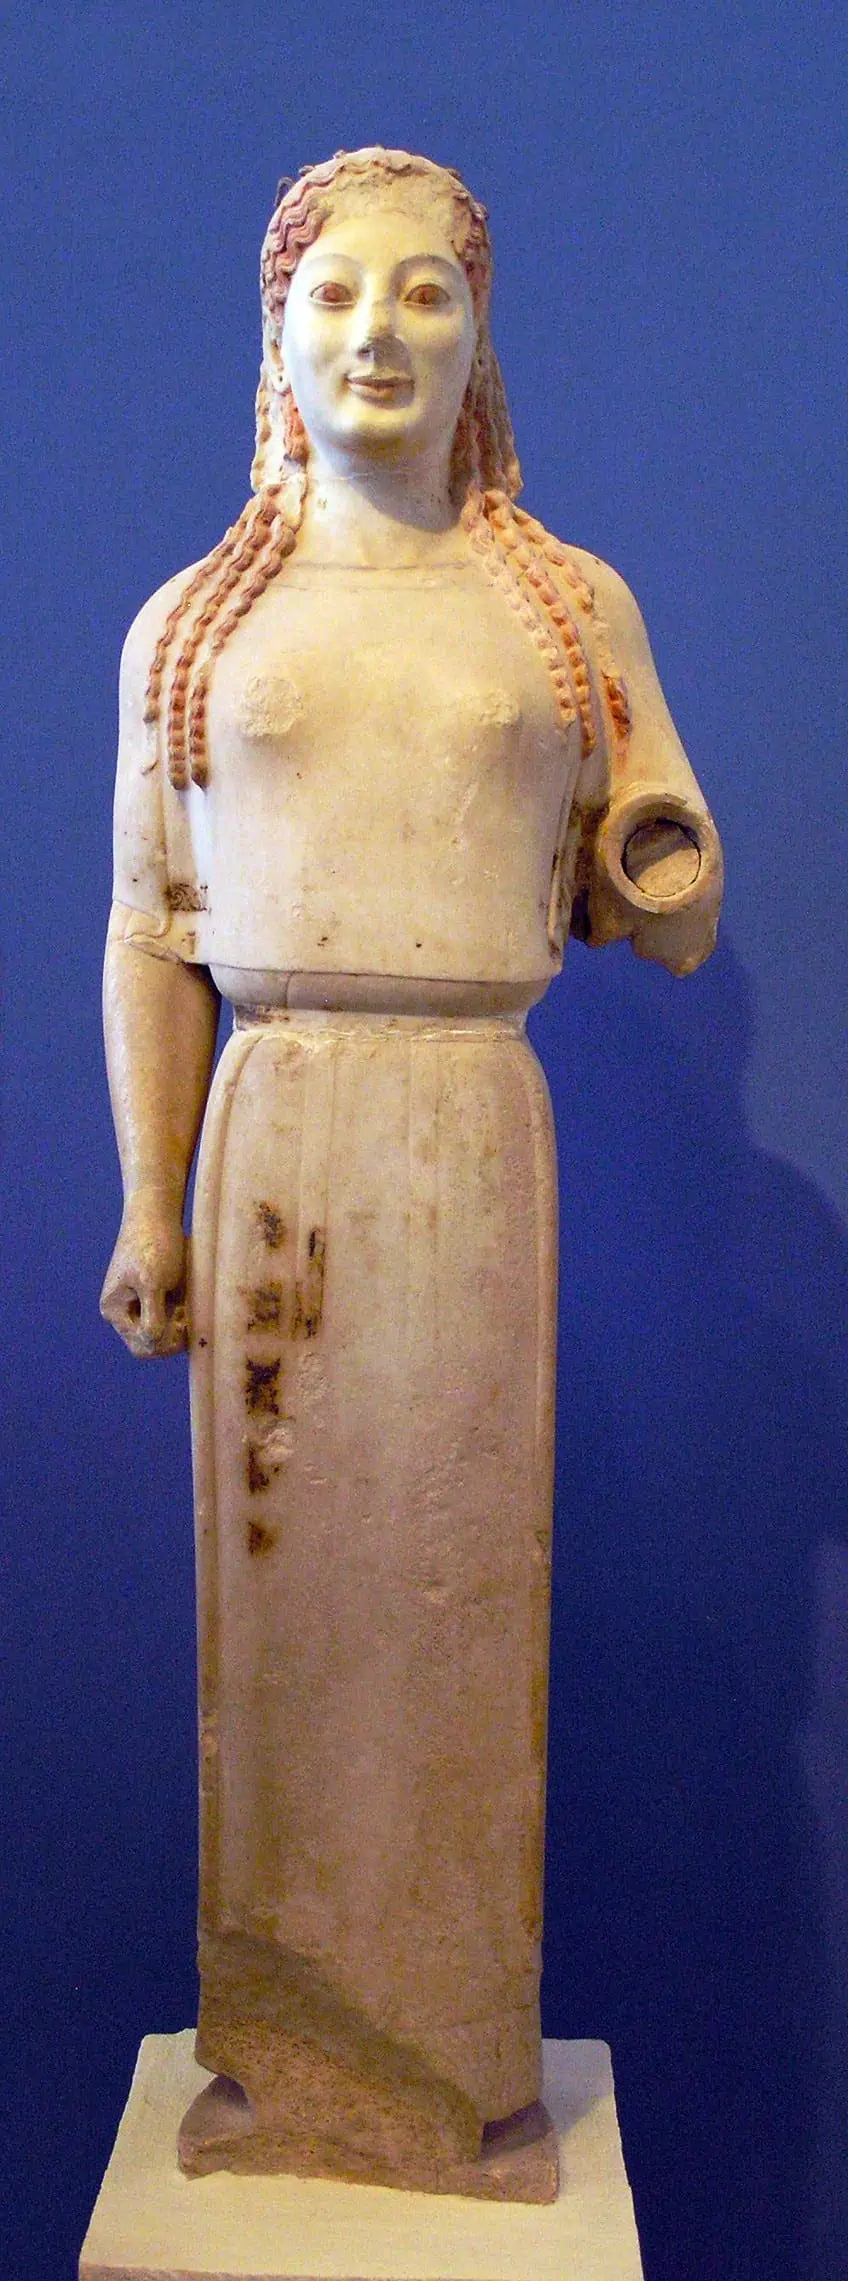 Female Greek Statues to Know